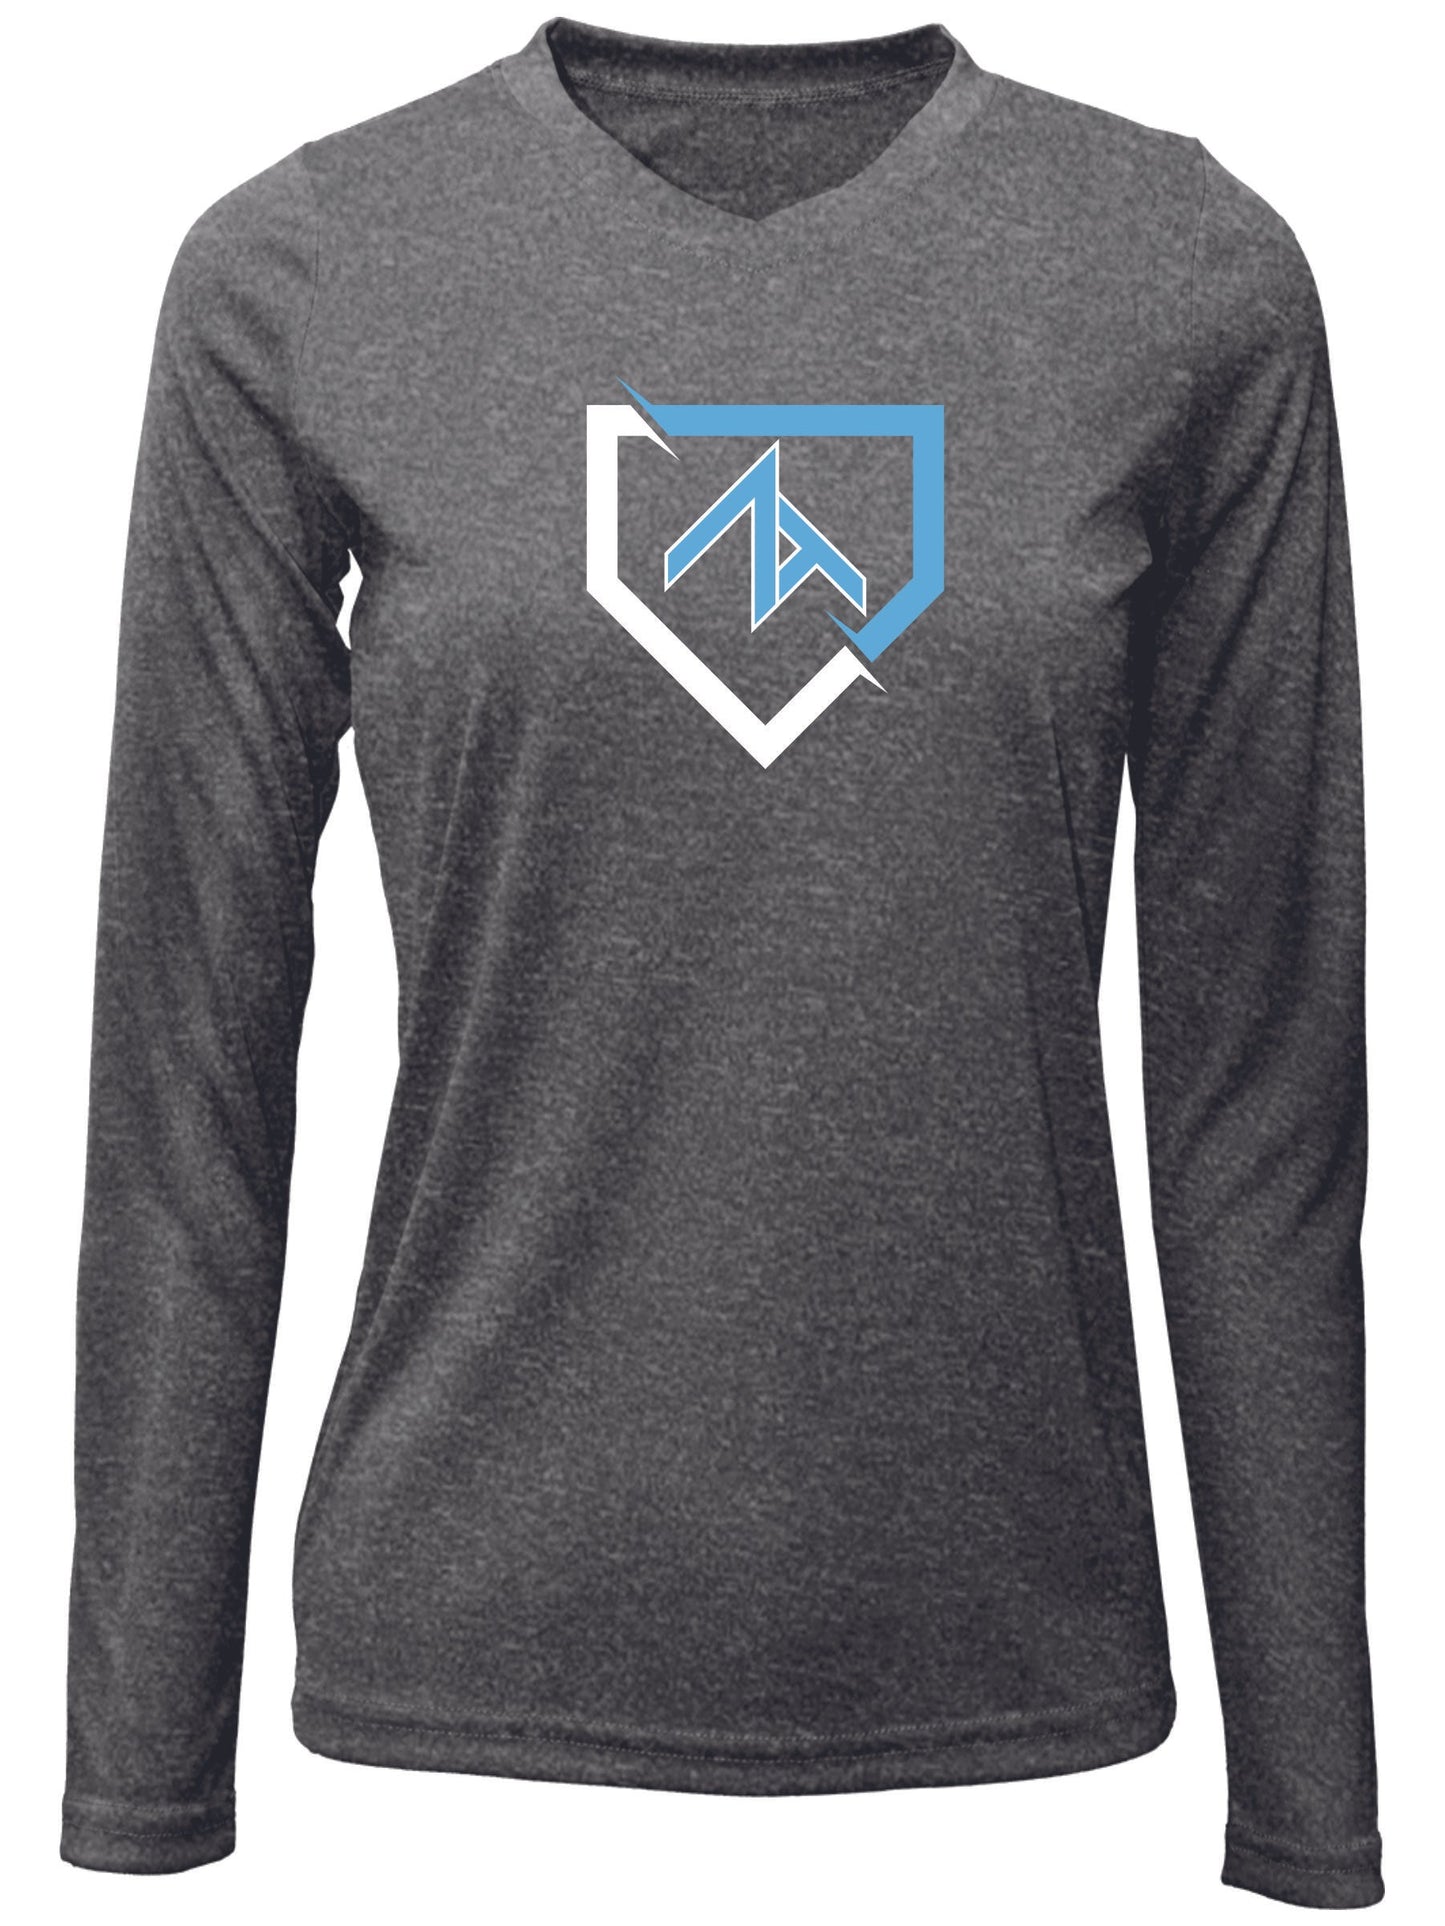 V-Neck Long Sleeve "FRACTURED PLATE" Dri-fit T-shirt